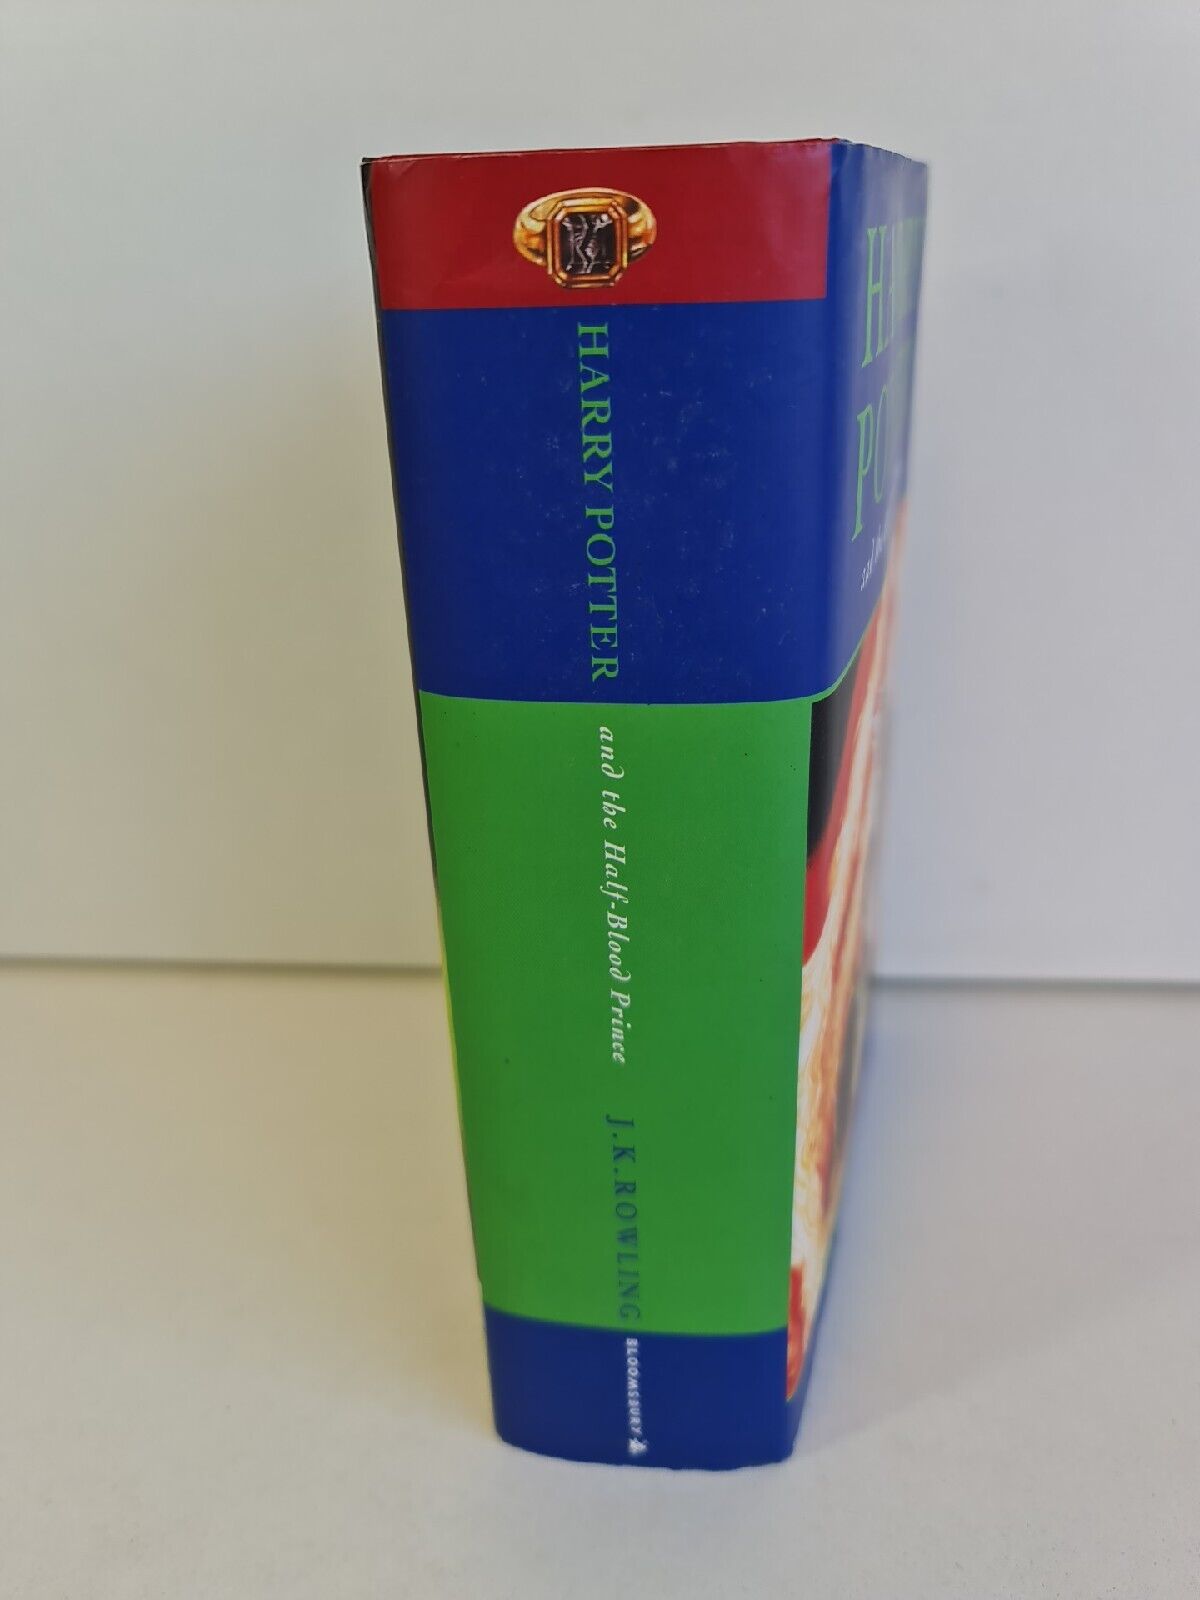 Harry Potter and the Half-Blood Prince by J. K. Rowling (2005) - OWL Misprint